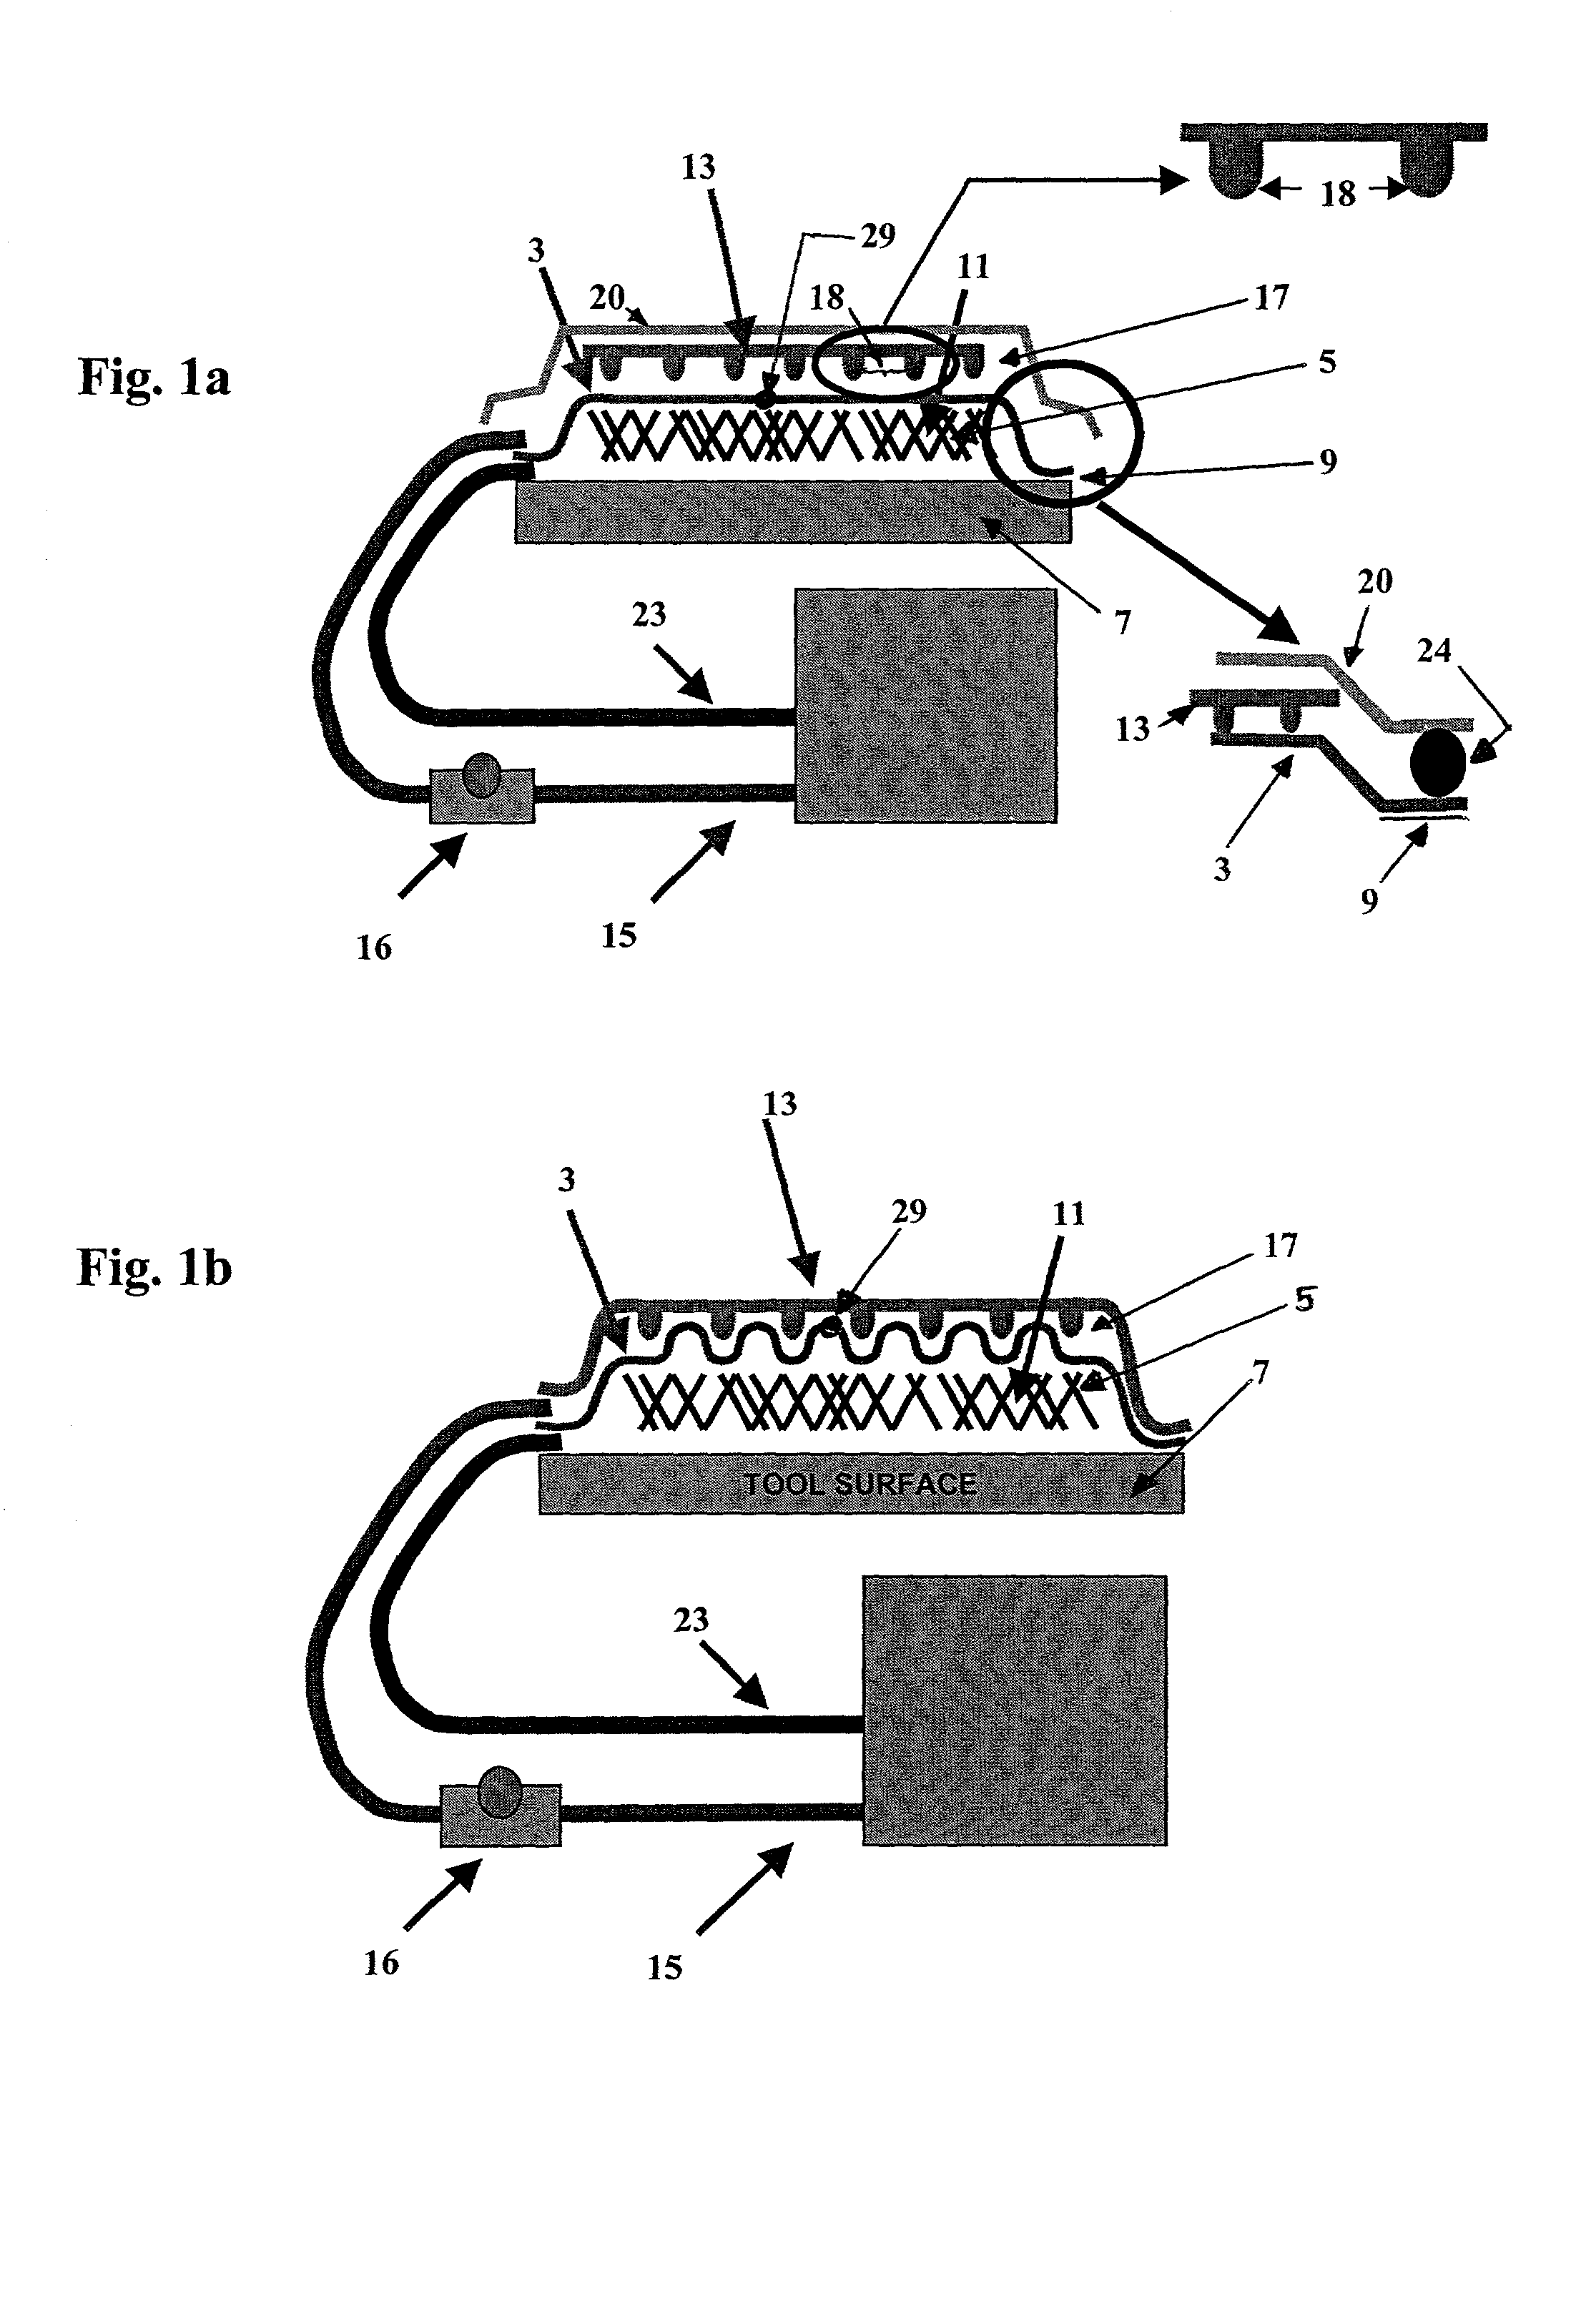 Apparatus and method for selectively distributing and controlling a means for impregnation of fibrous articles